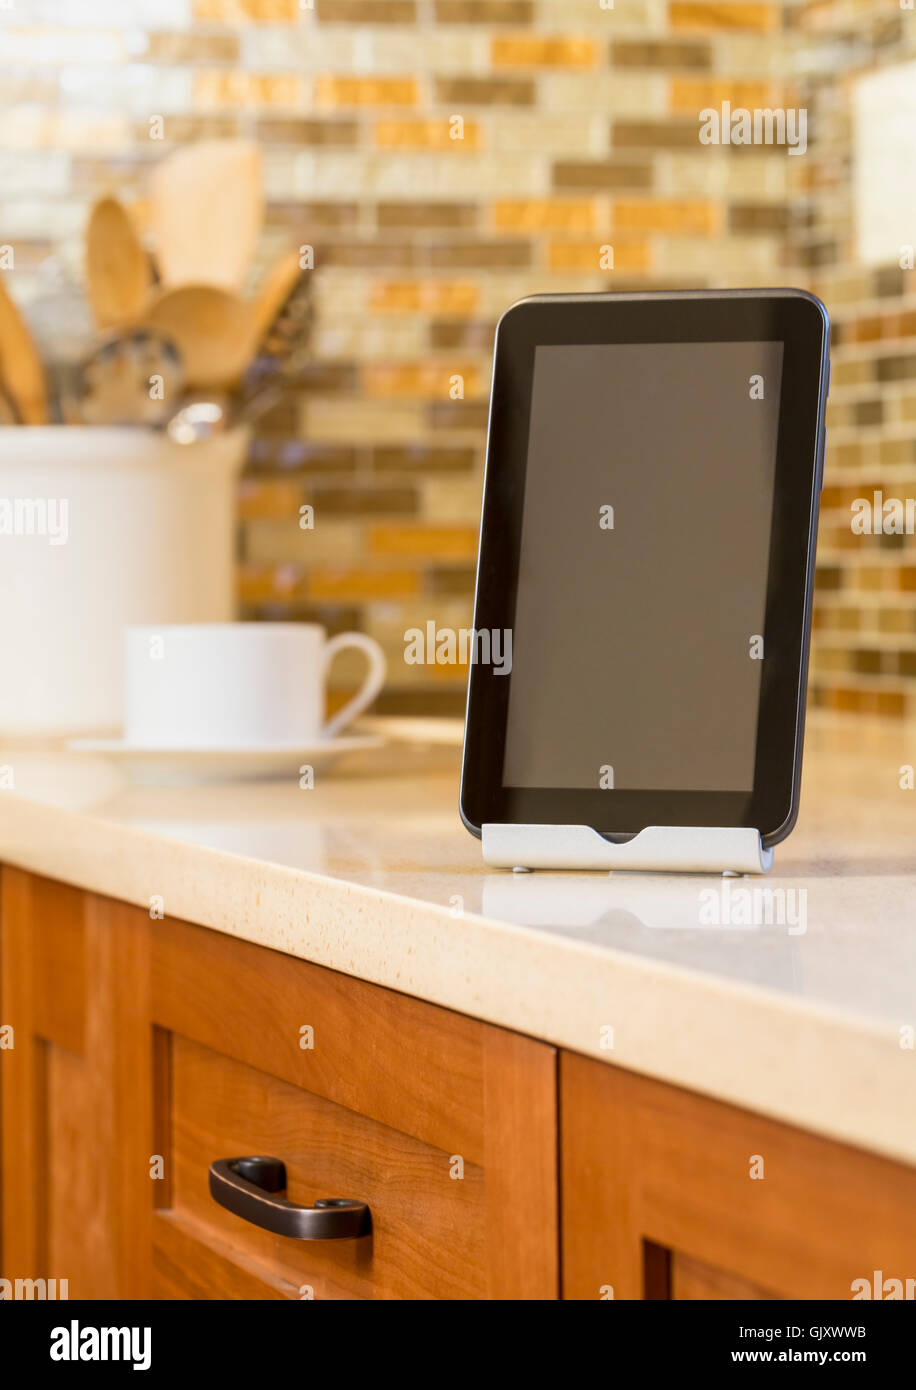 Close-up of tablet computer tech devices on quartz countertop in contemporary home kitchen. Selective focus on tablet with blank screen display. Stock Photo